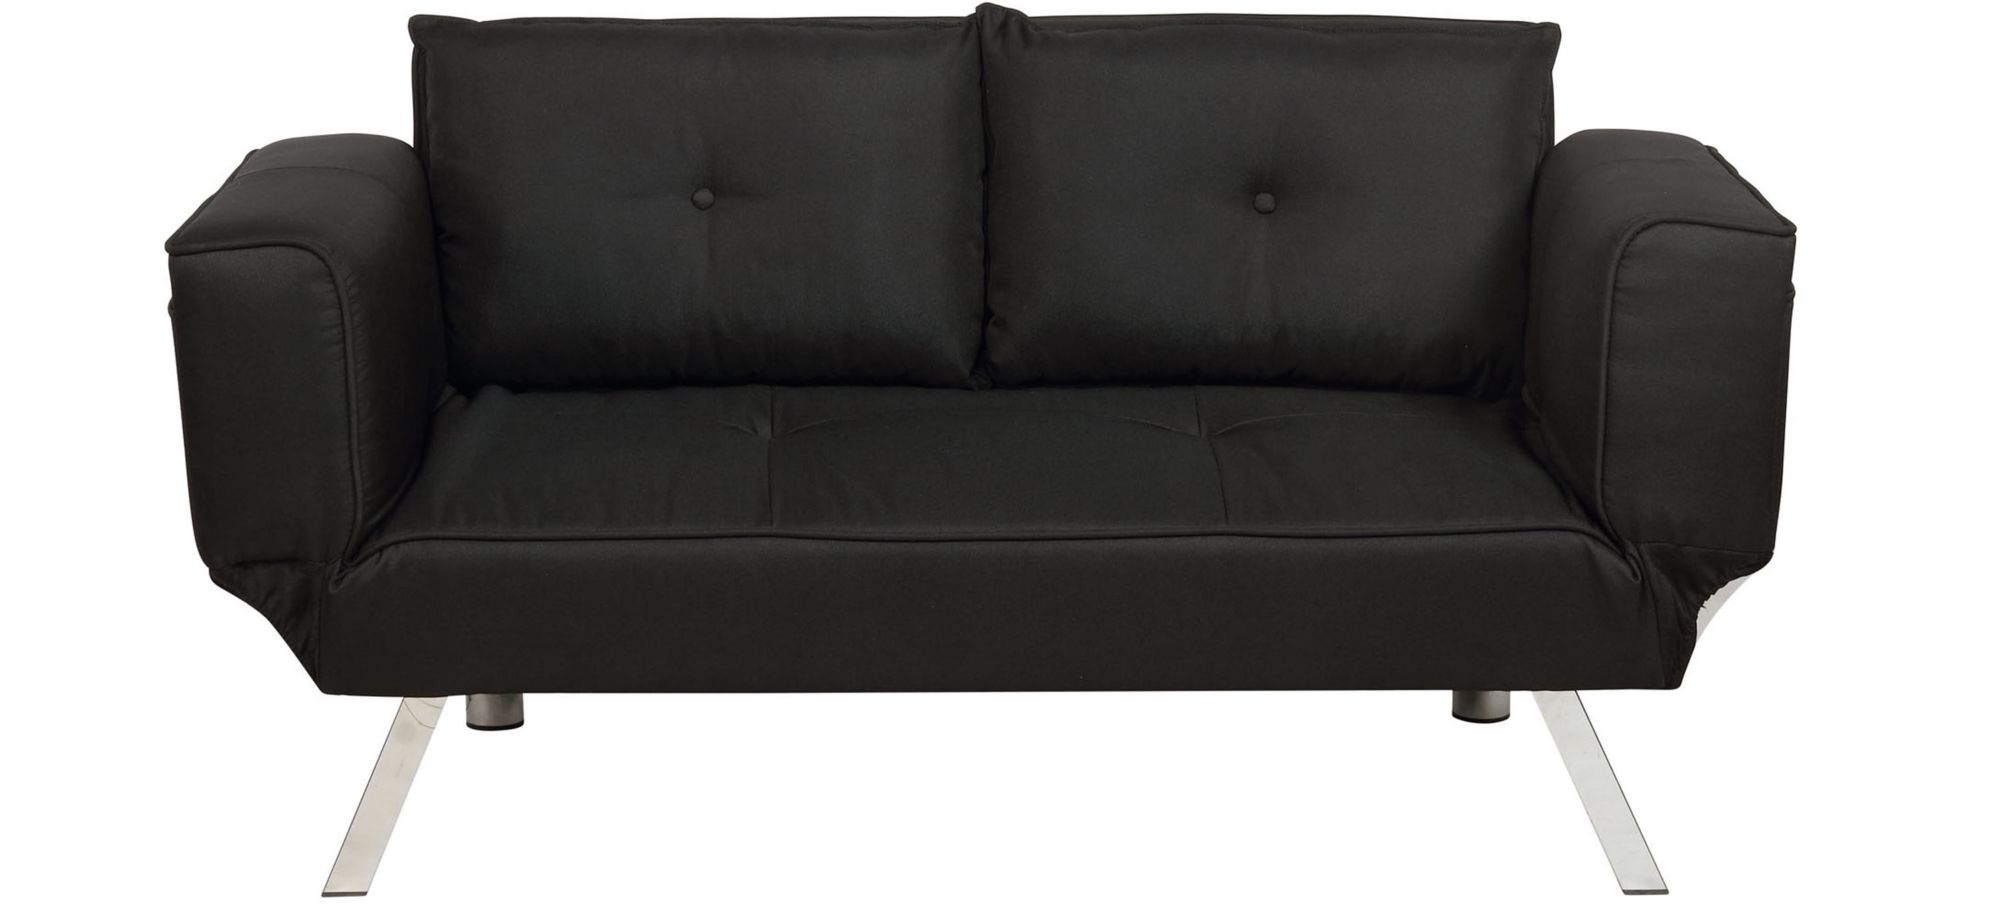 Miles Convertible Futon in Black by Lifestyle Solutions